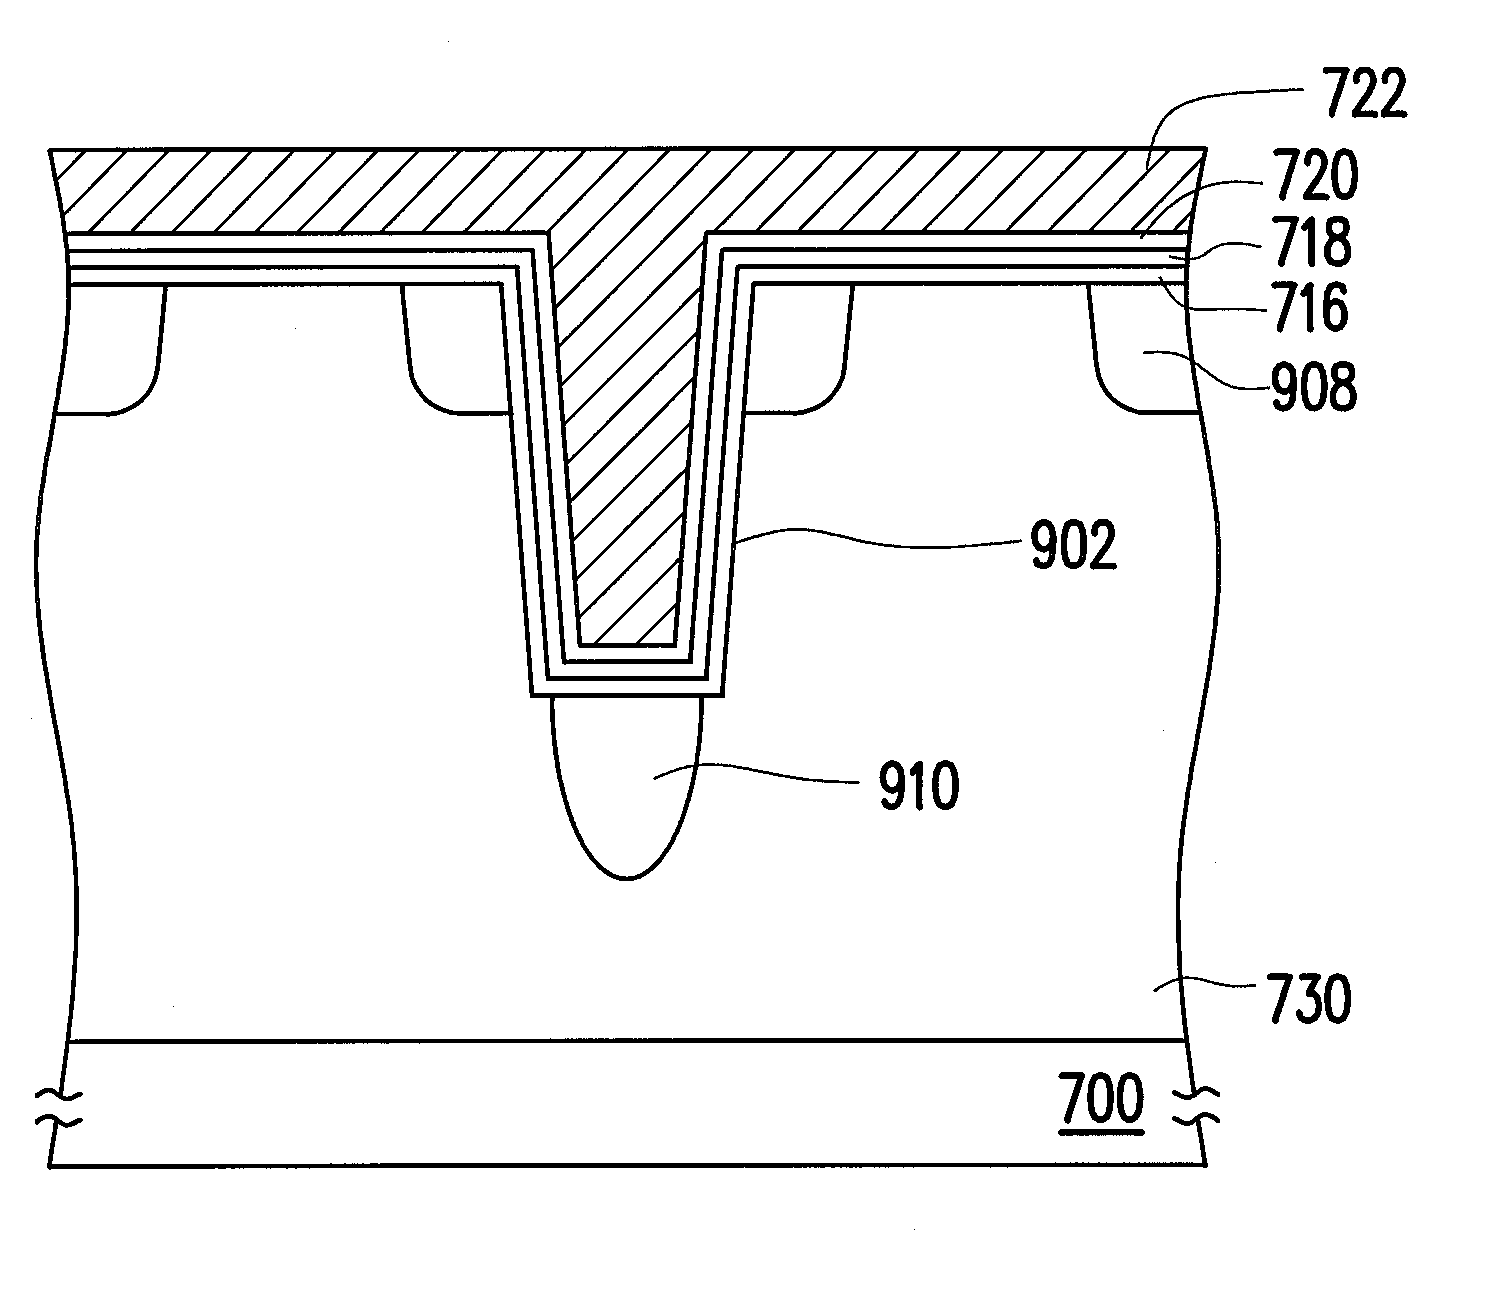 Memory device and methods for fabricating and operating the same